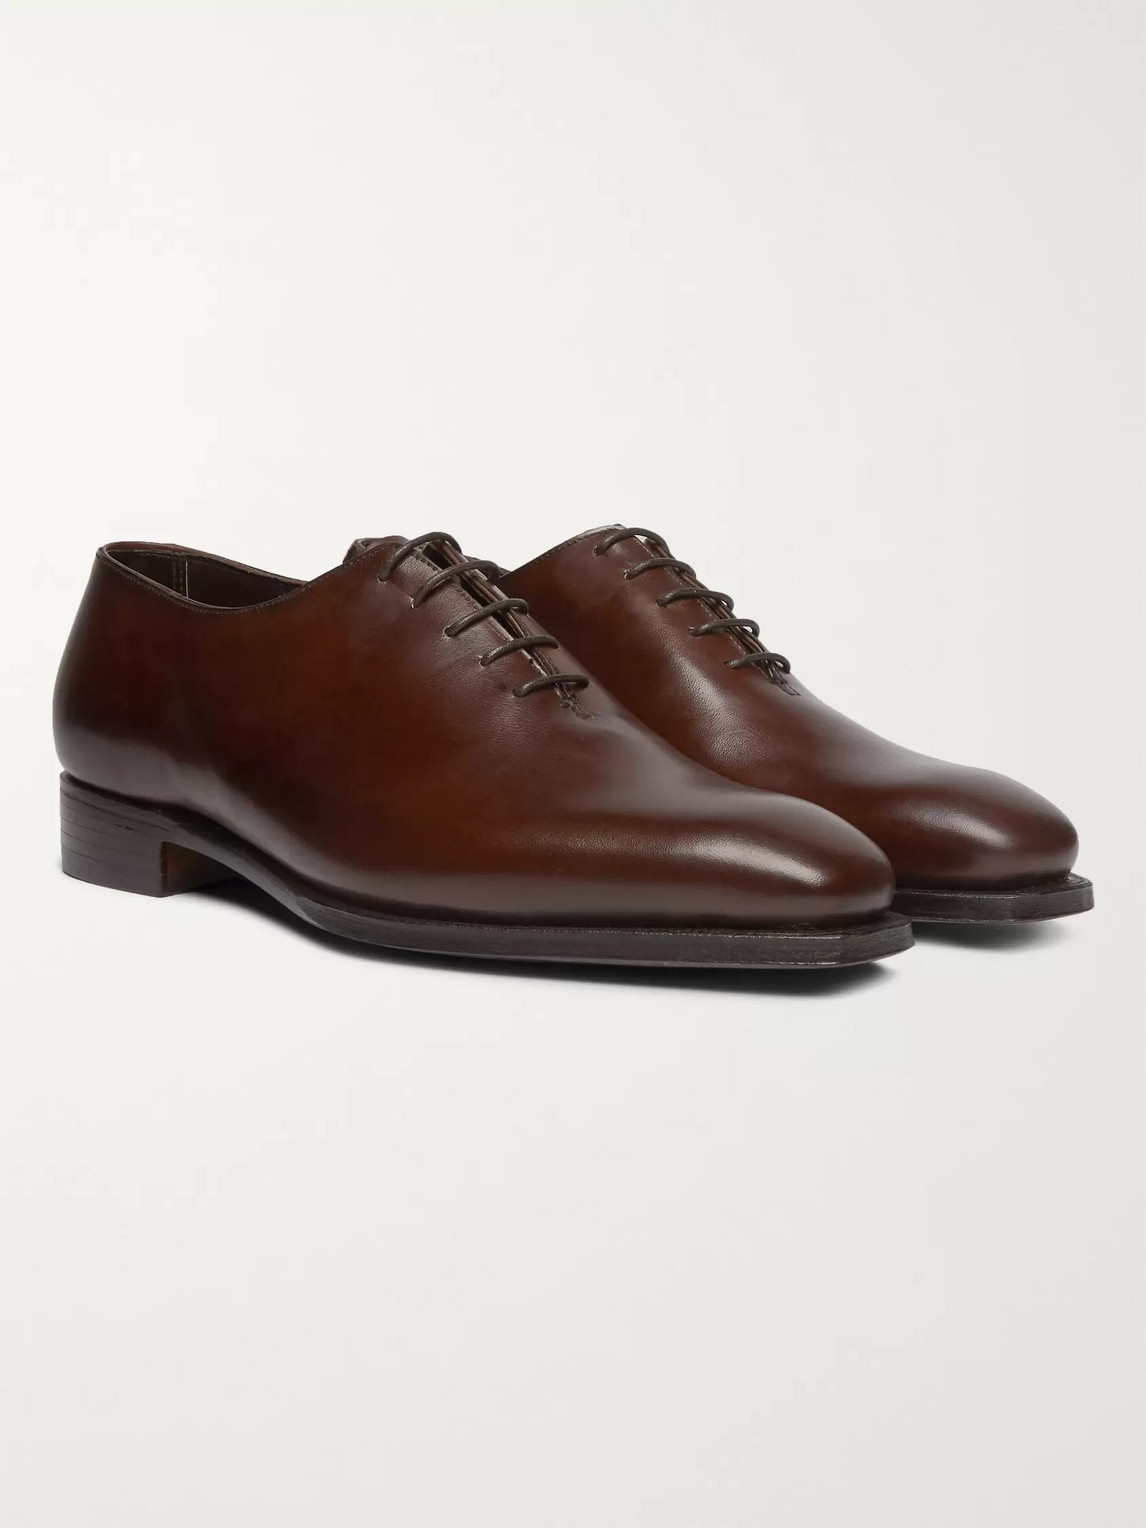 George Cleverley Alan 3 Whole-cut Leather Oxford Shoes In Brown